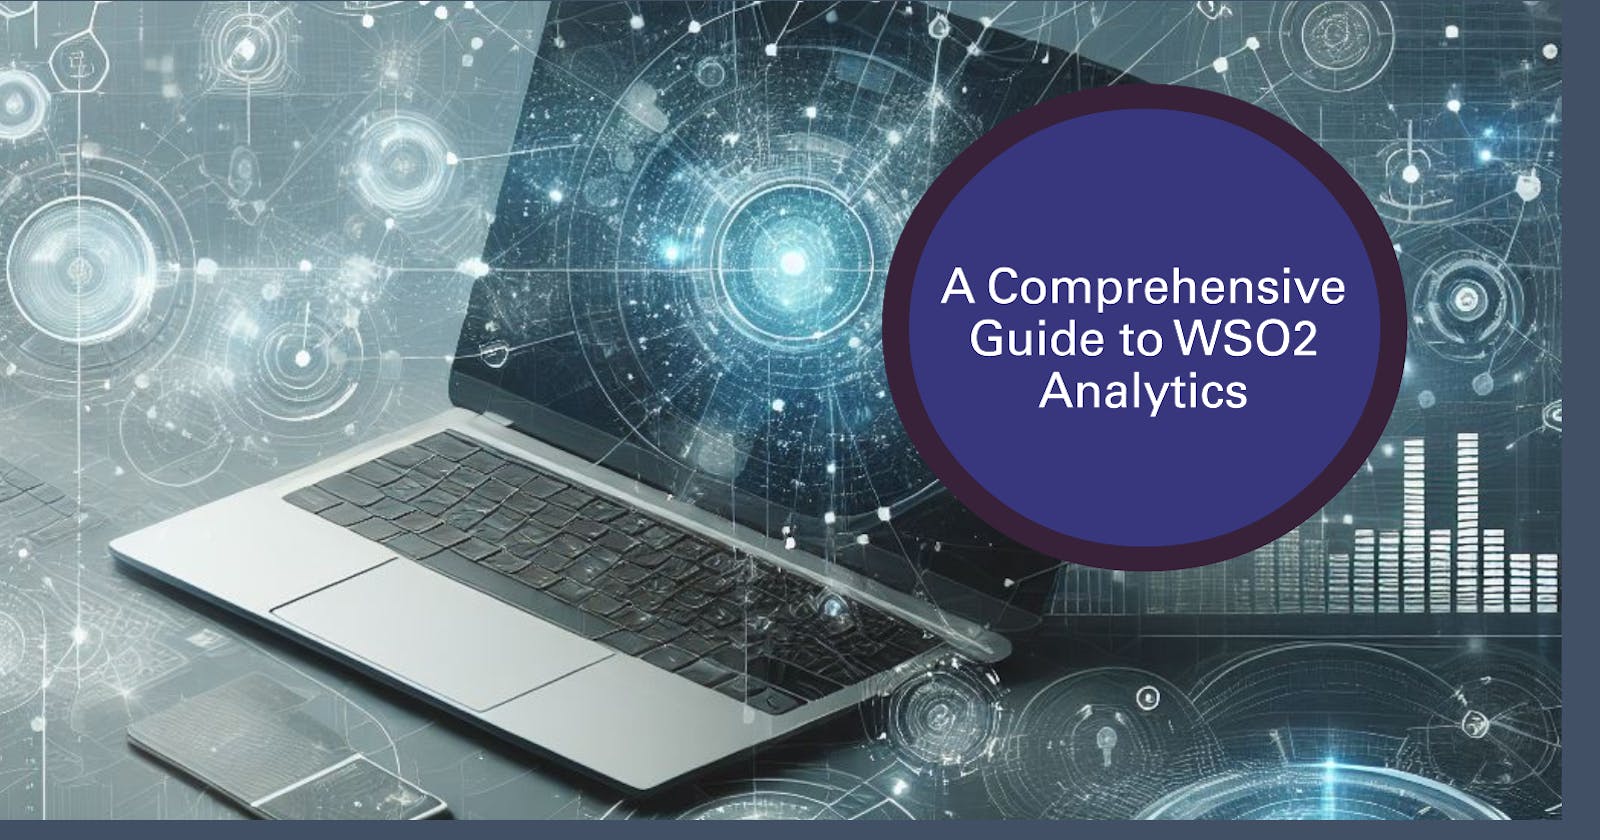 A Comprehensive Guide to WSO2 Analytics: Features, Workflows & Services